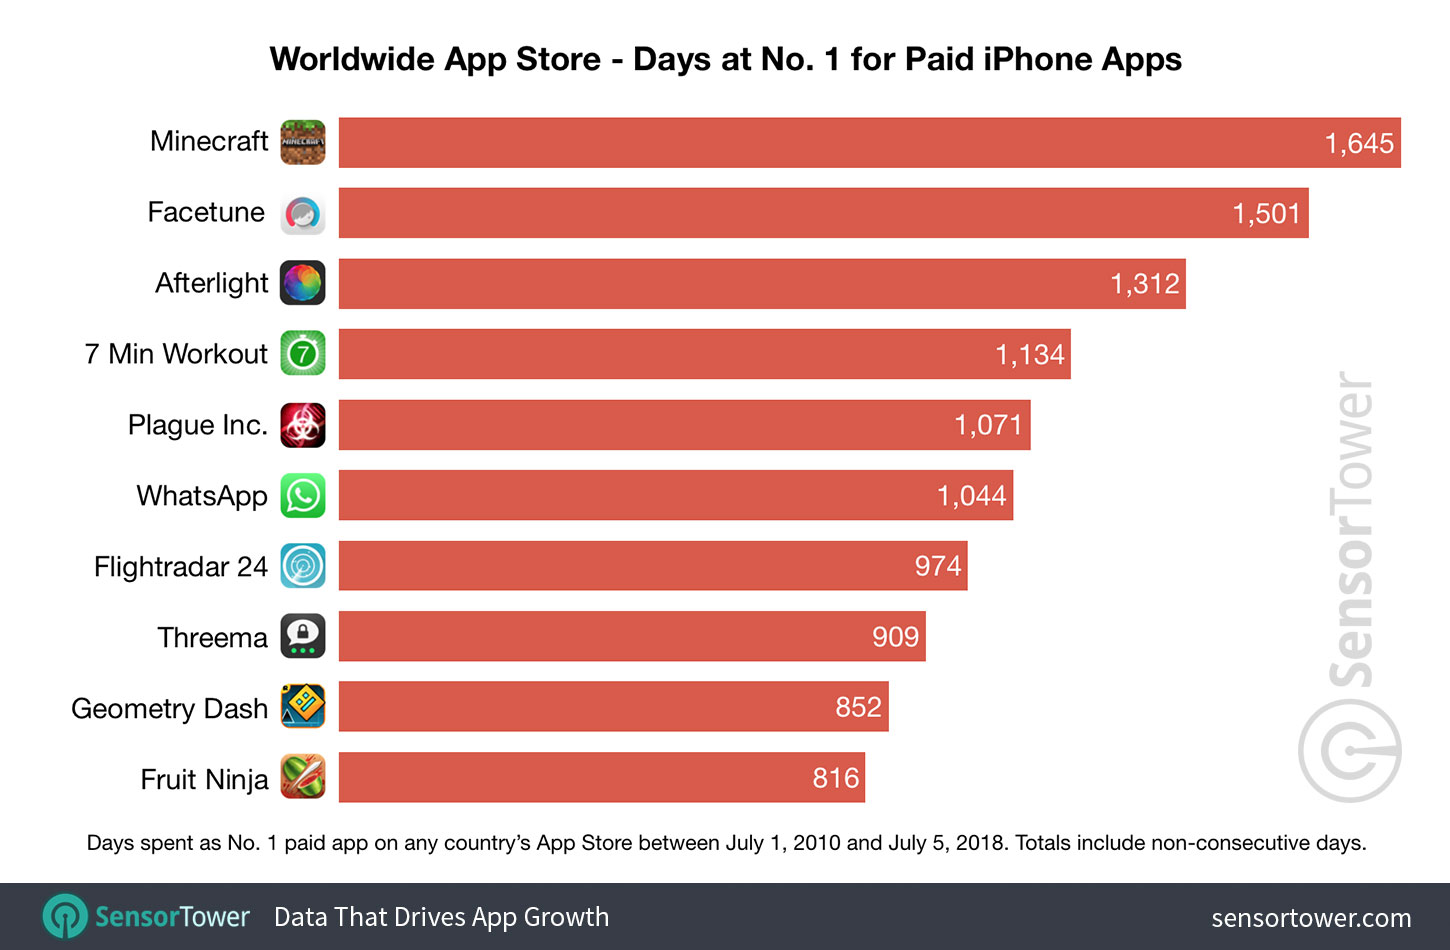 Chart showing a ranking of apps by number of days spent as No. 1 paid iPhone app on the Worldwide App Store